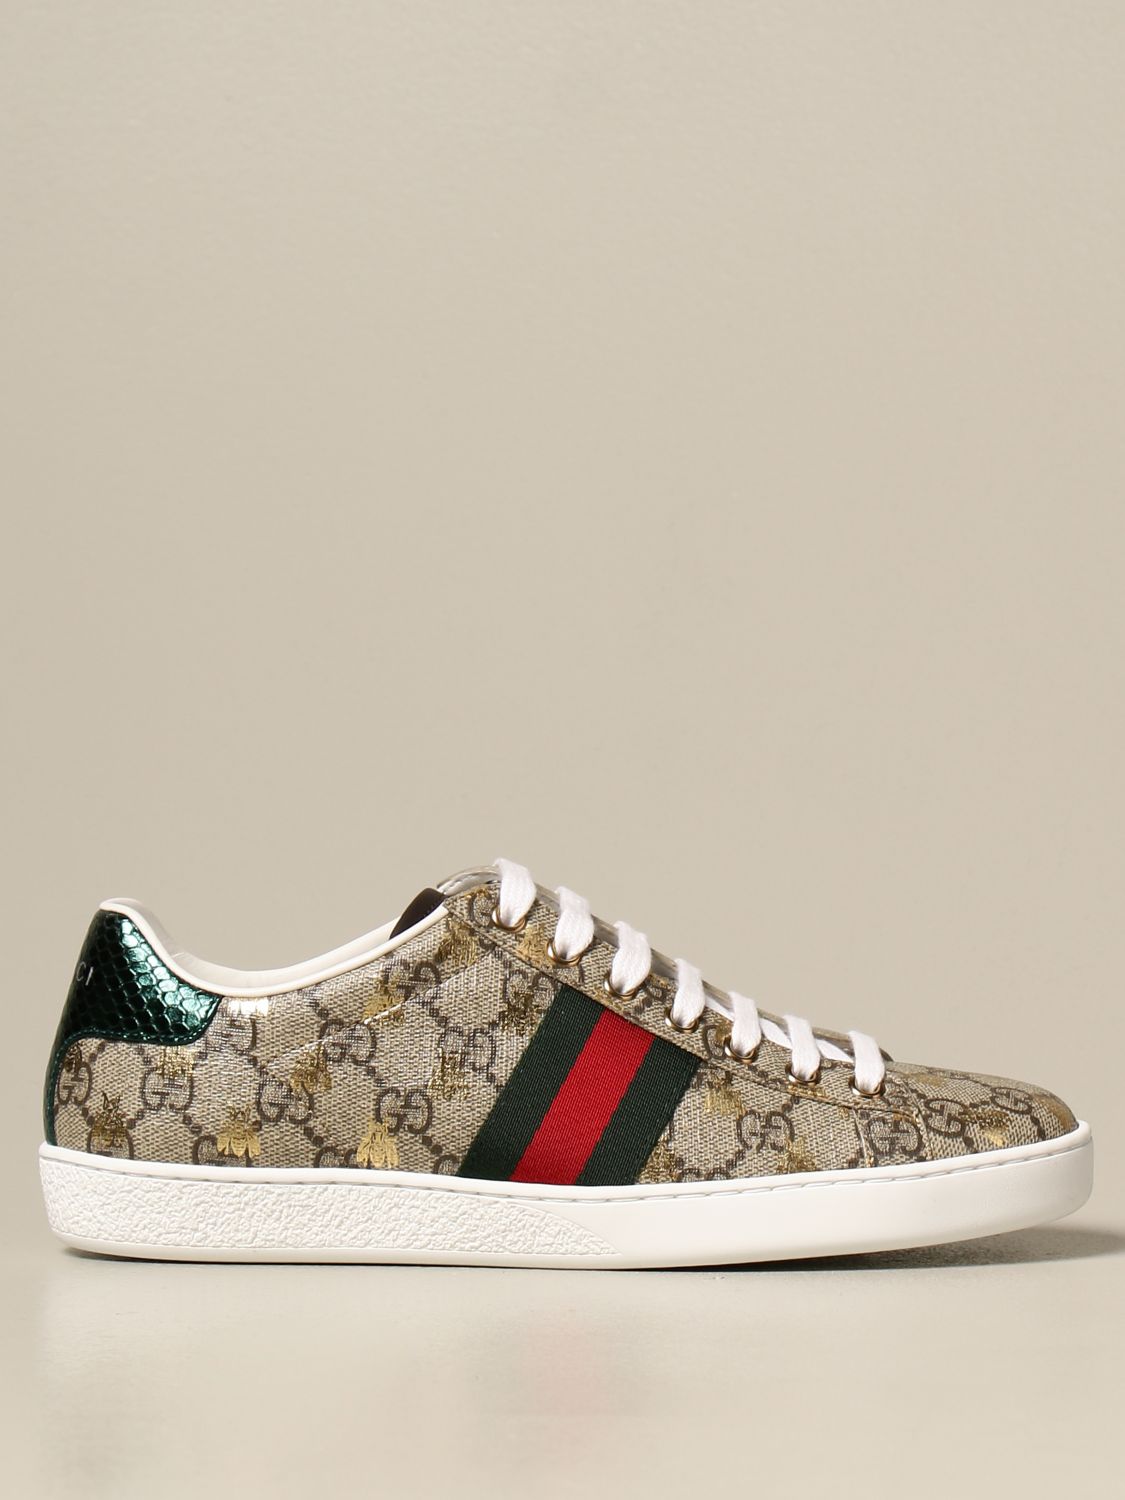 GUCCI: Ace sneakers in GG Supreme fabric with Web bands - Beige | Gucci ...